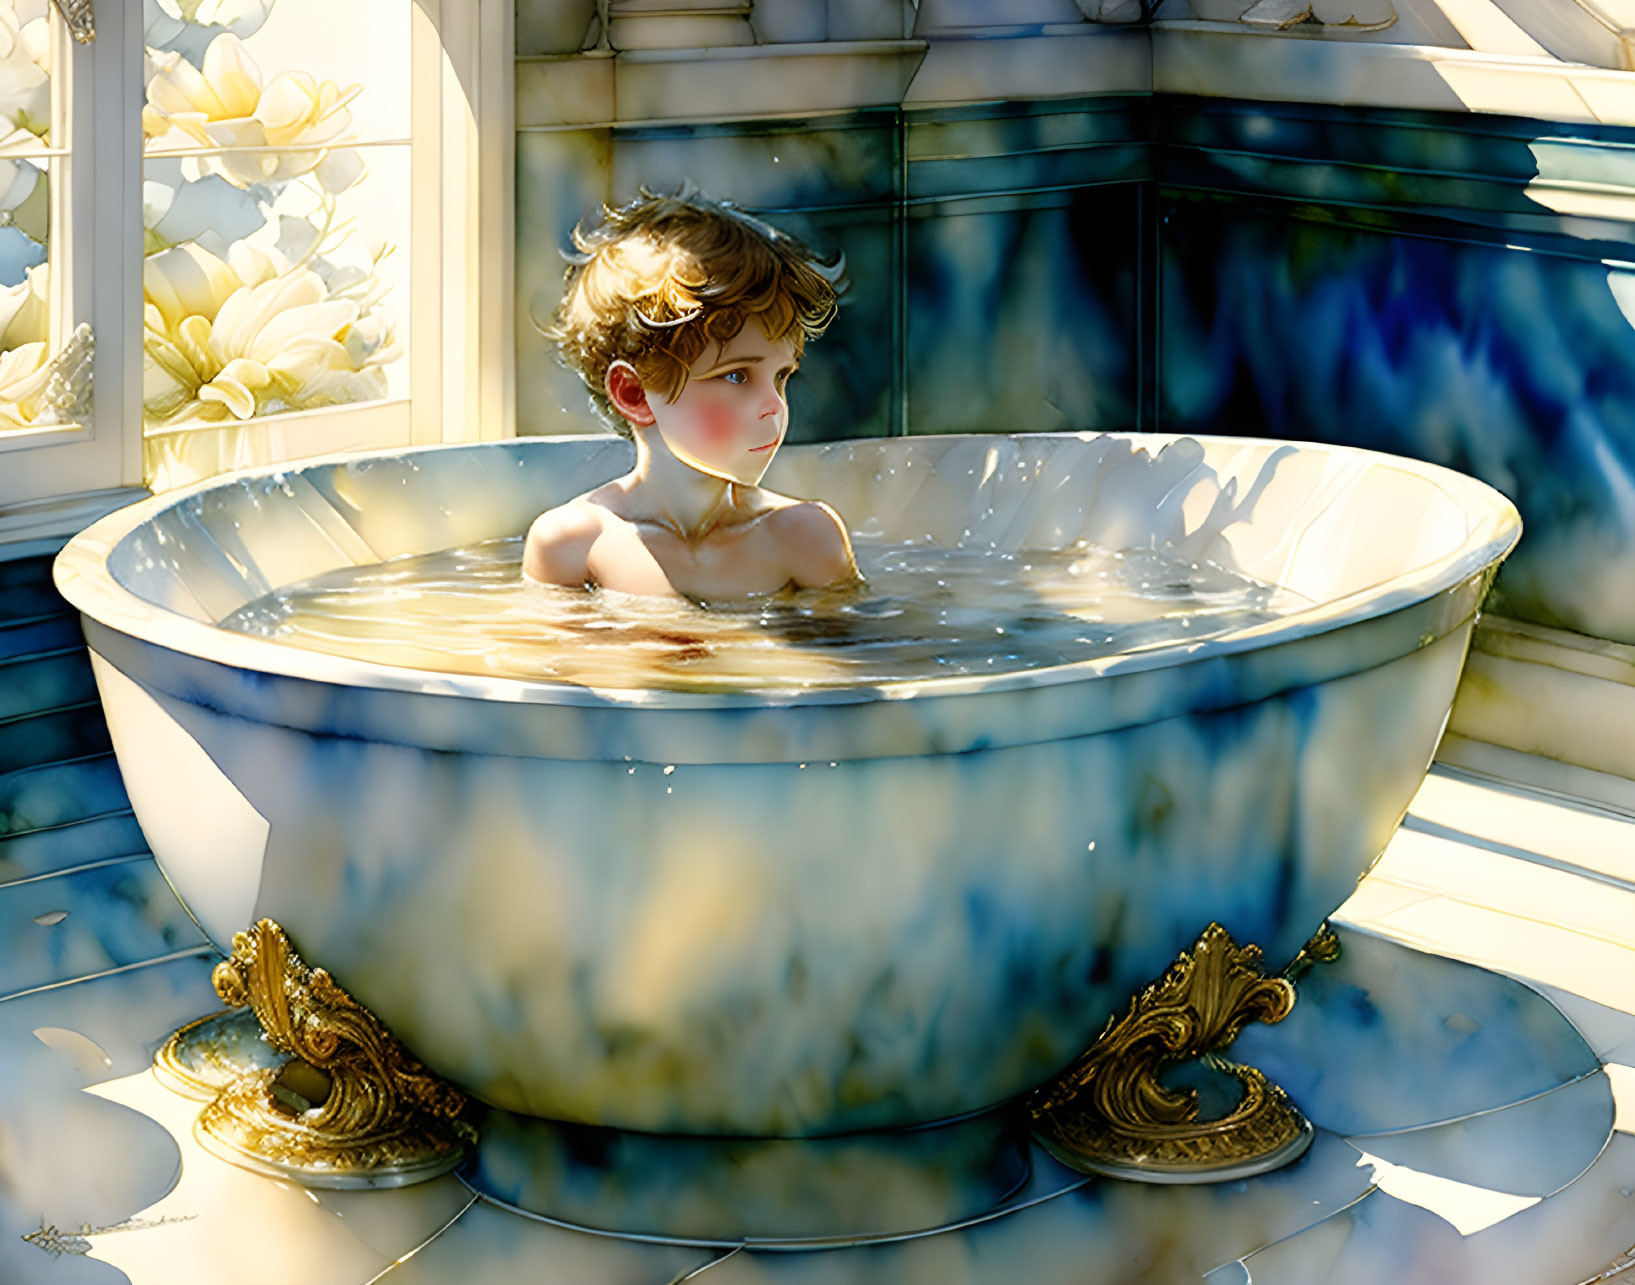 Child in Vintage Bathtub with Gold Feet in Sunlit Room